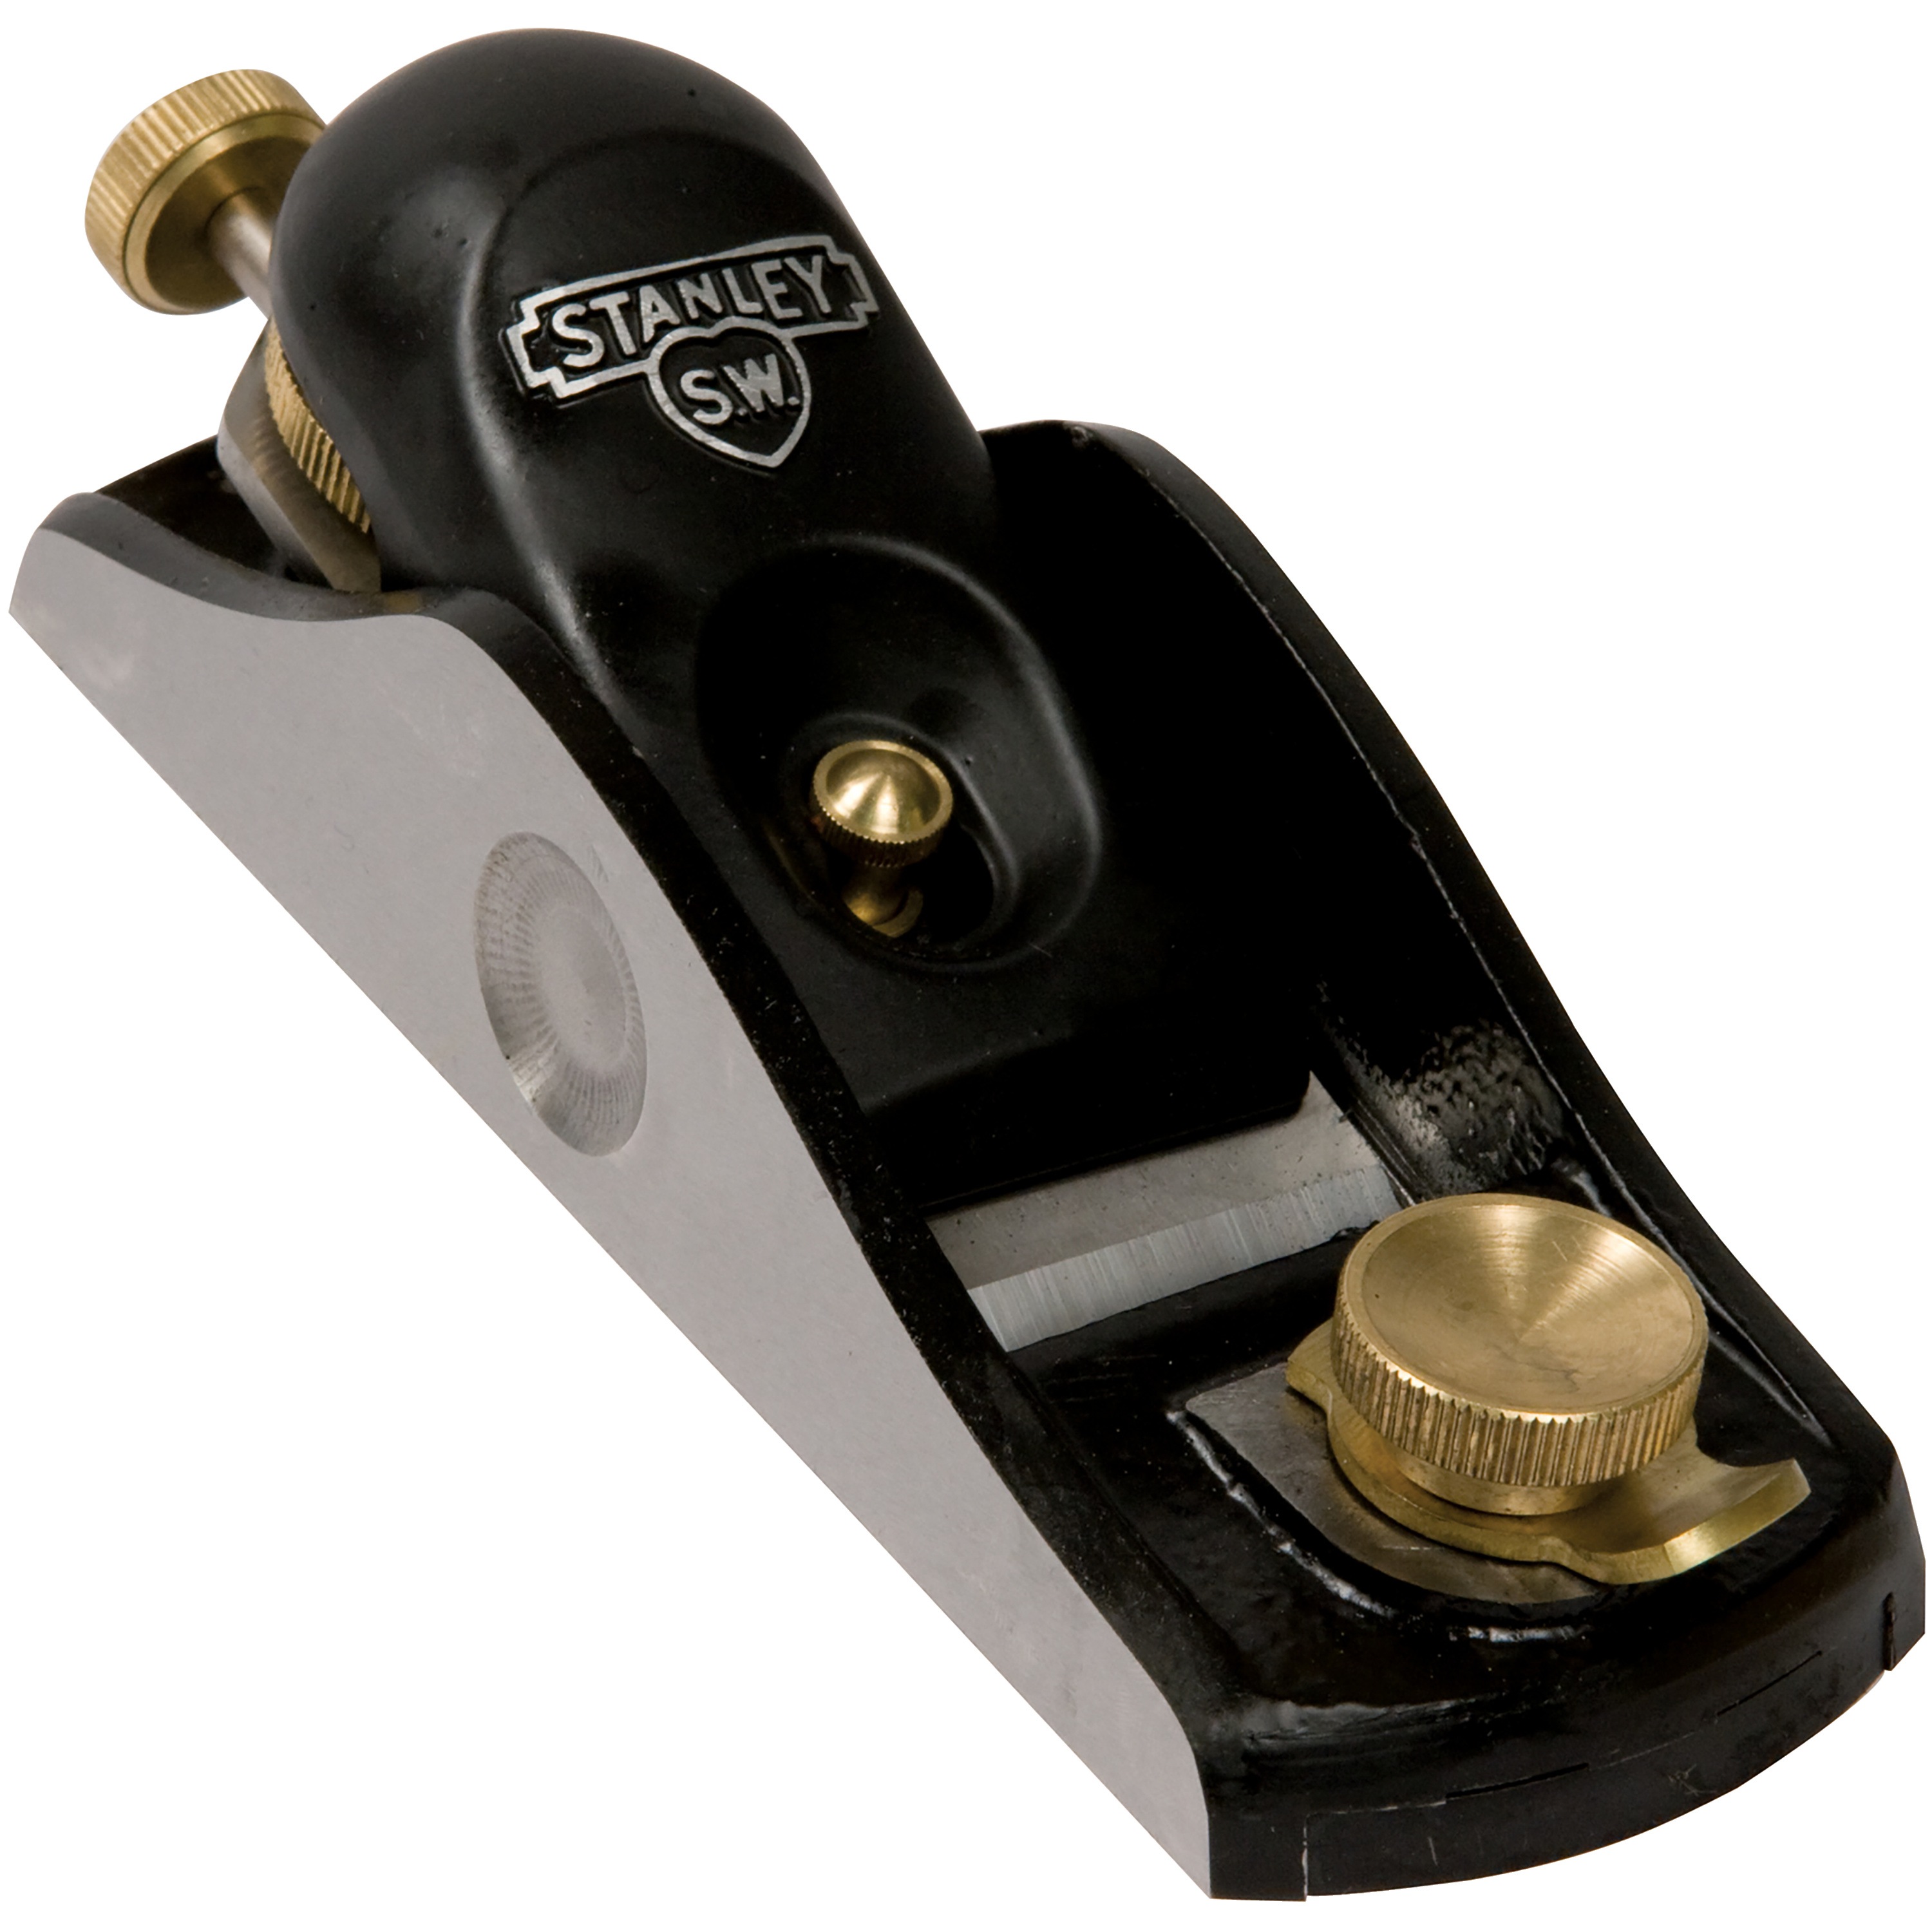 Stanley Tools - No 6012 SweetHeart Low Angle Block Plane - 12-139